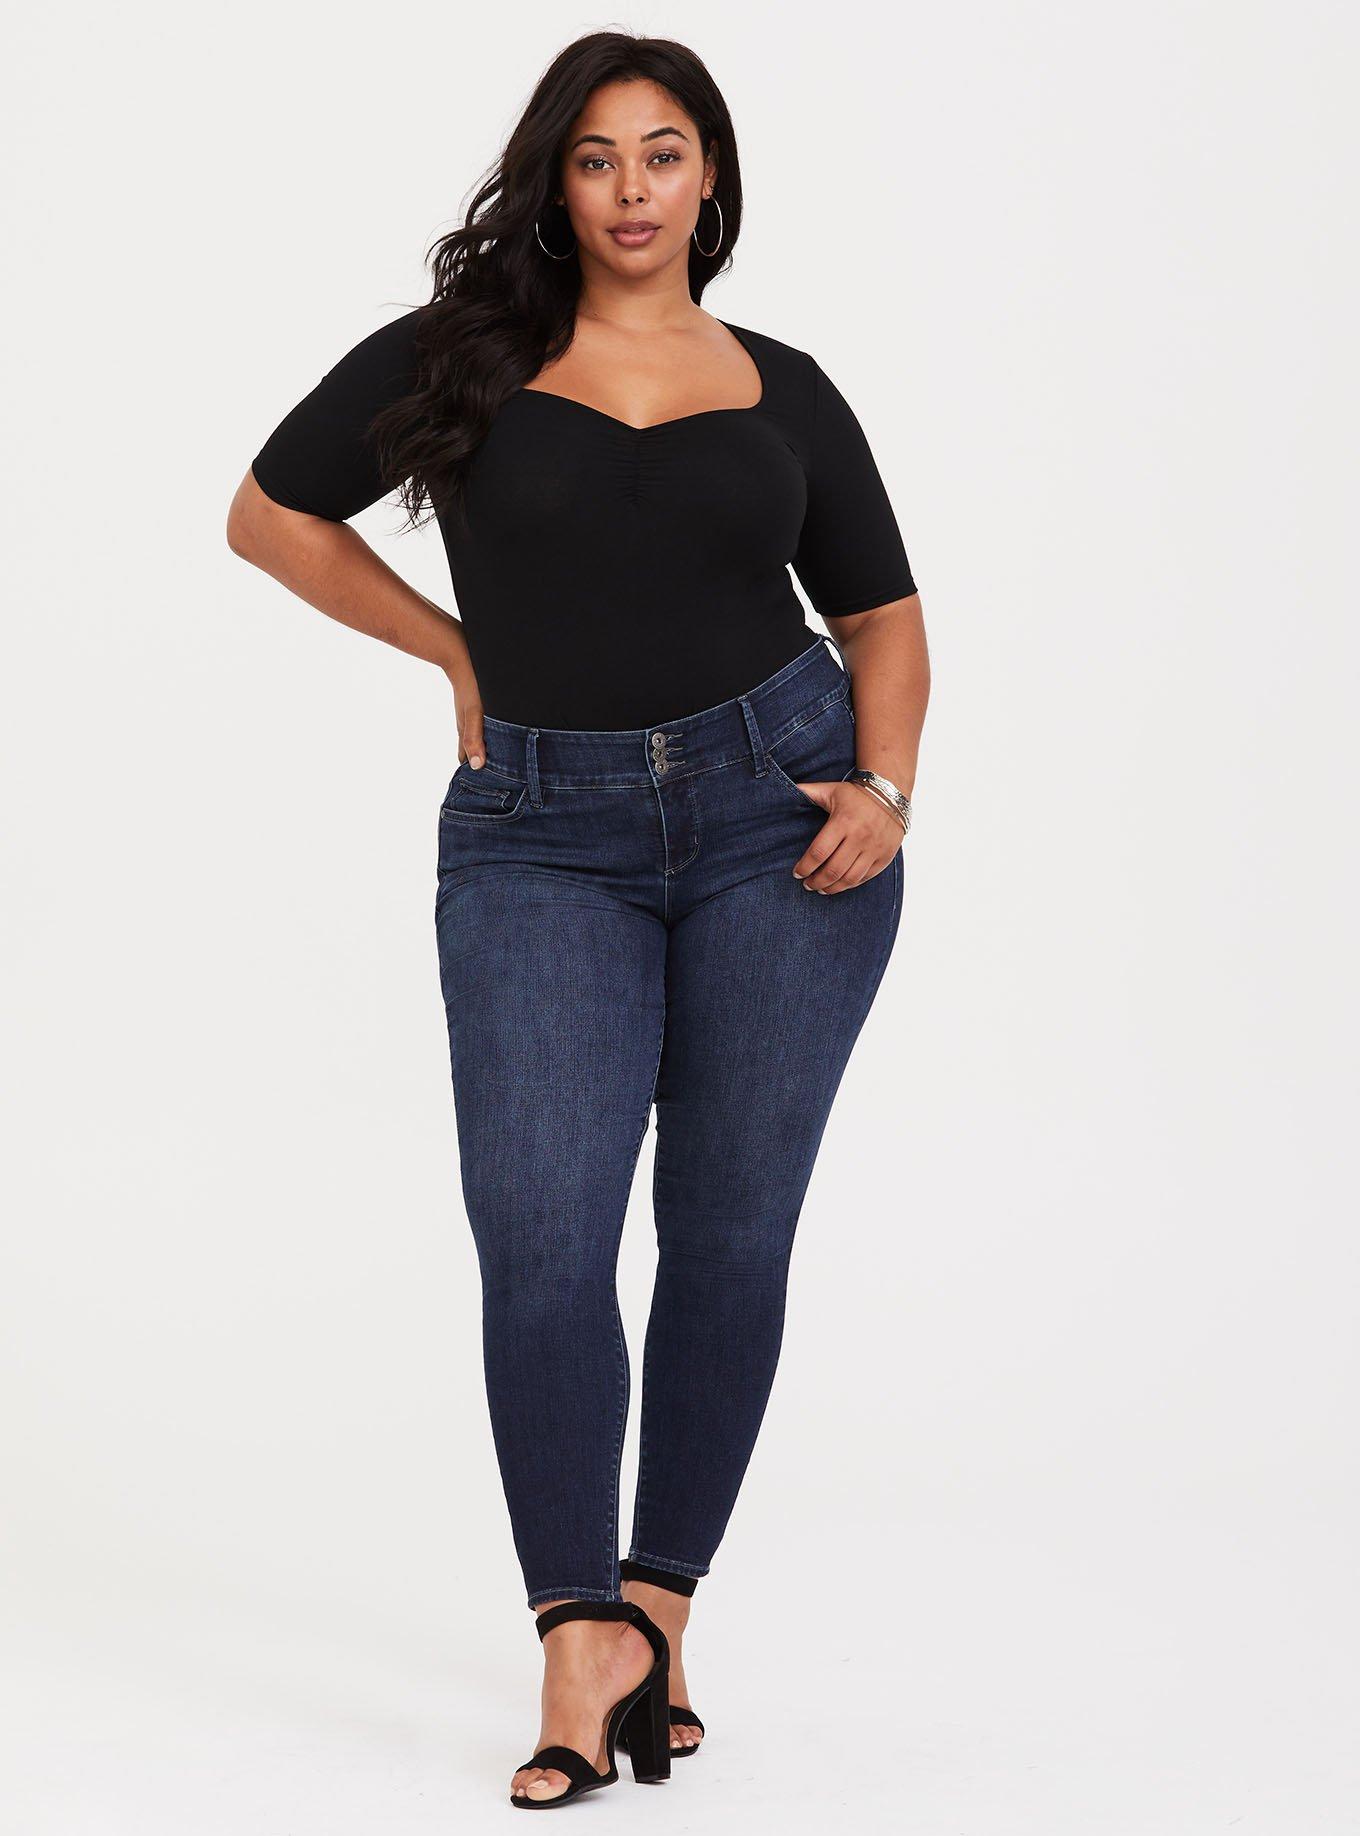 Plus Size - Foxy Ruched Sweetheart Neckline Top - Torrid